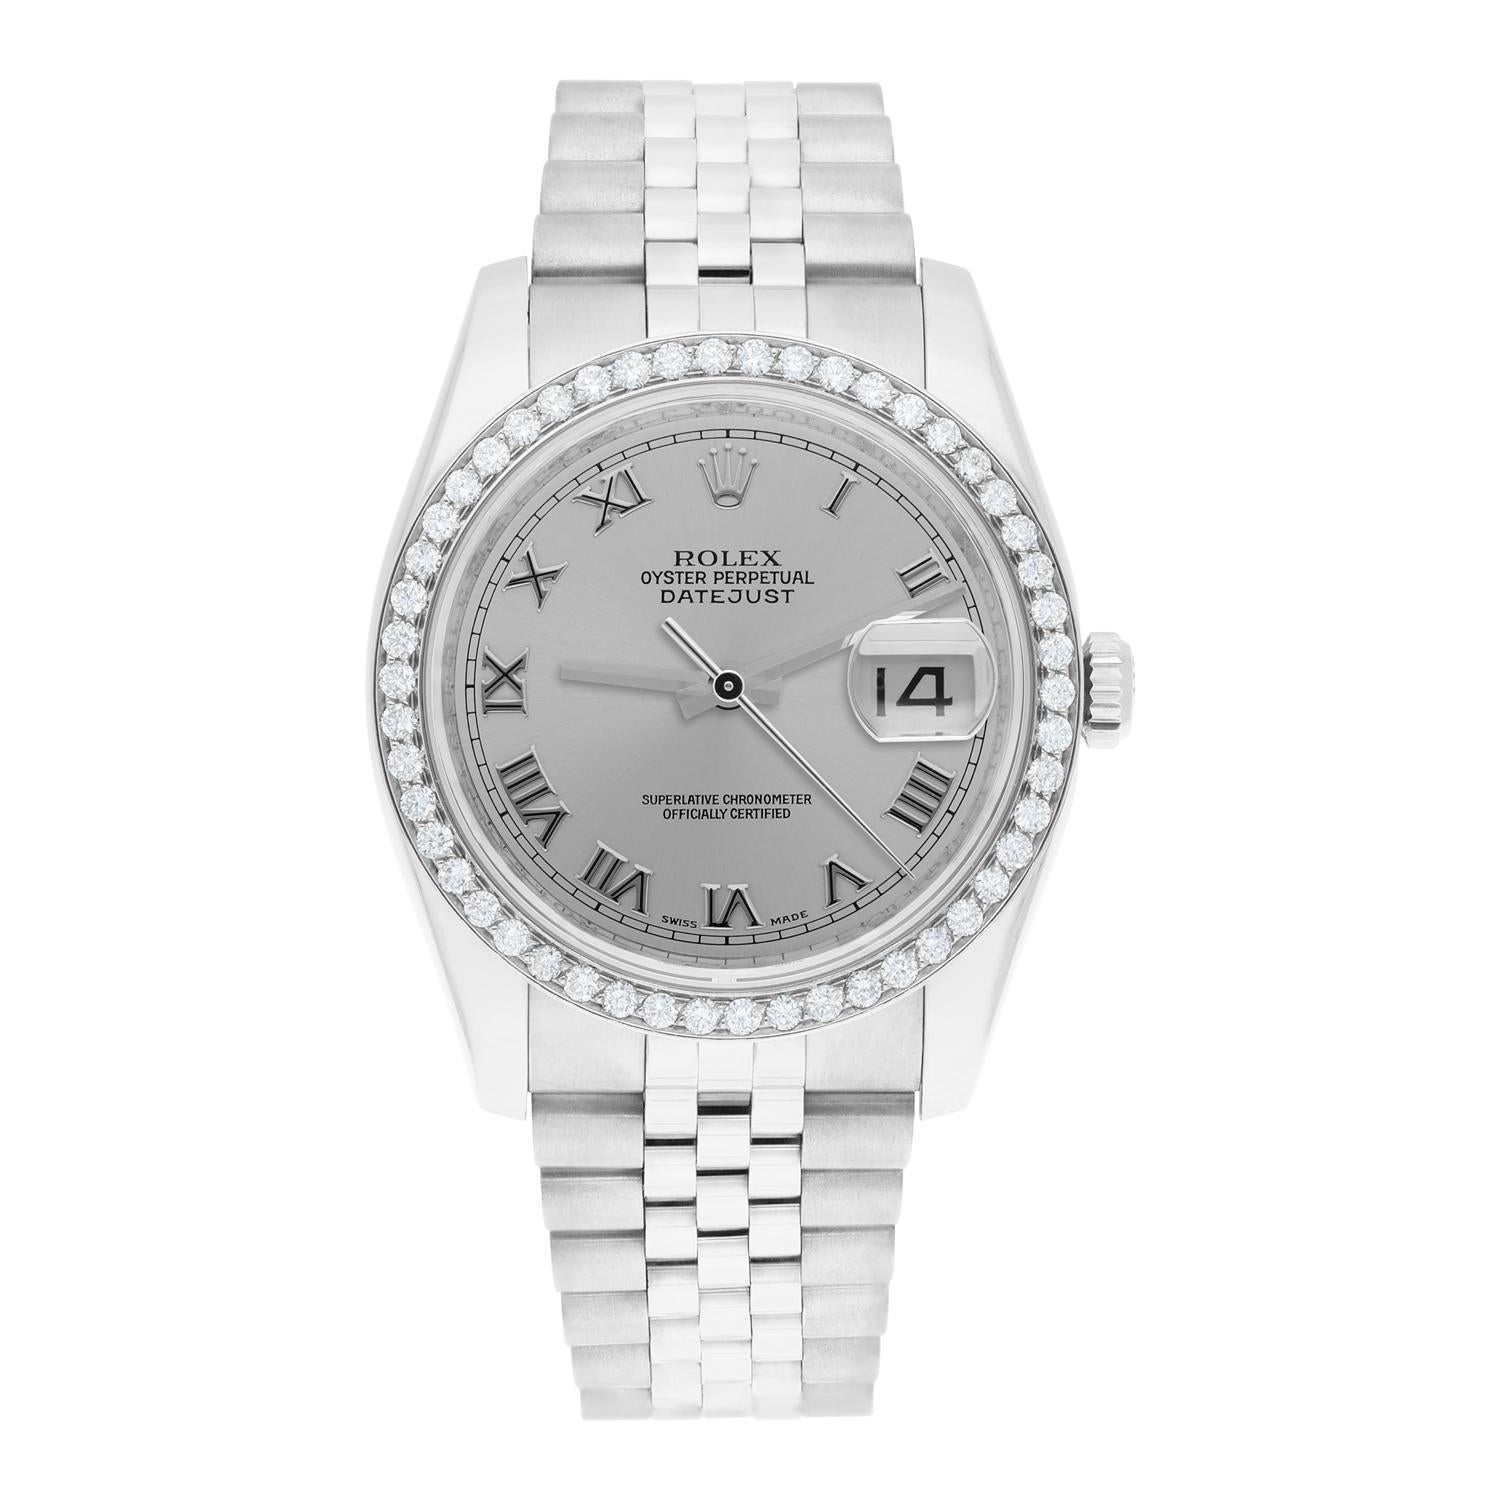 Brand: Rolex
Series: Datejust 
Model: 116234
Case Diameter: 36 mm
Bracelet: Jubilee band; stainless steel
Bezel: Custom Diamond Set
Dial: Silver Roman
Carat Weight: 1.32 carats in total diamond weight
The sale includes a Rolex box and an appraisal